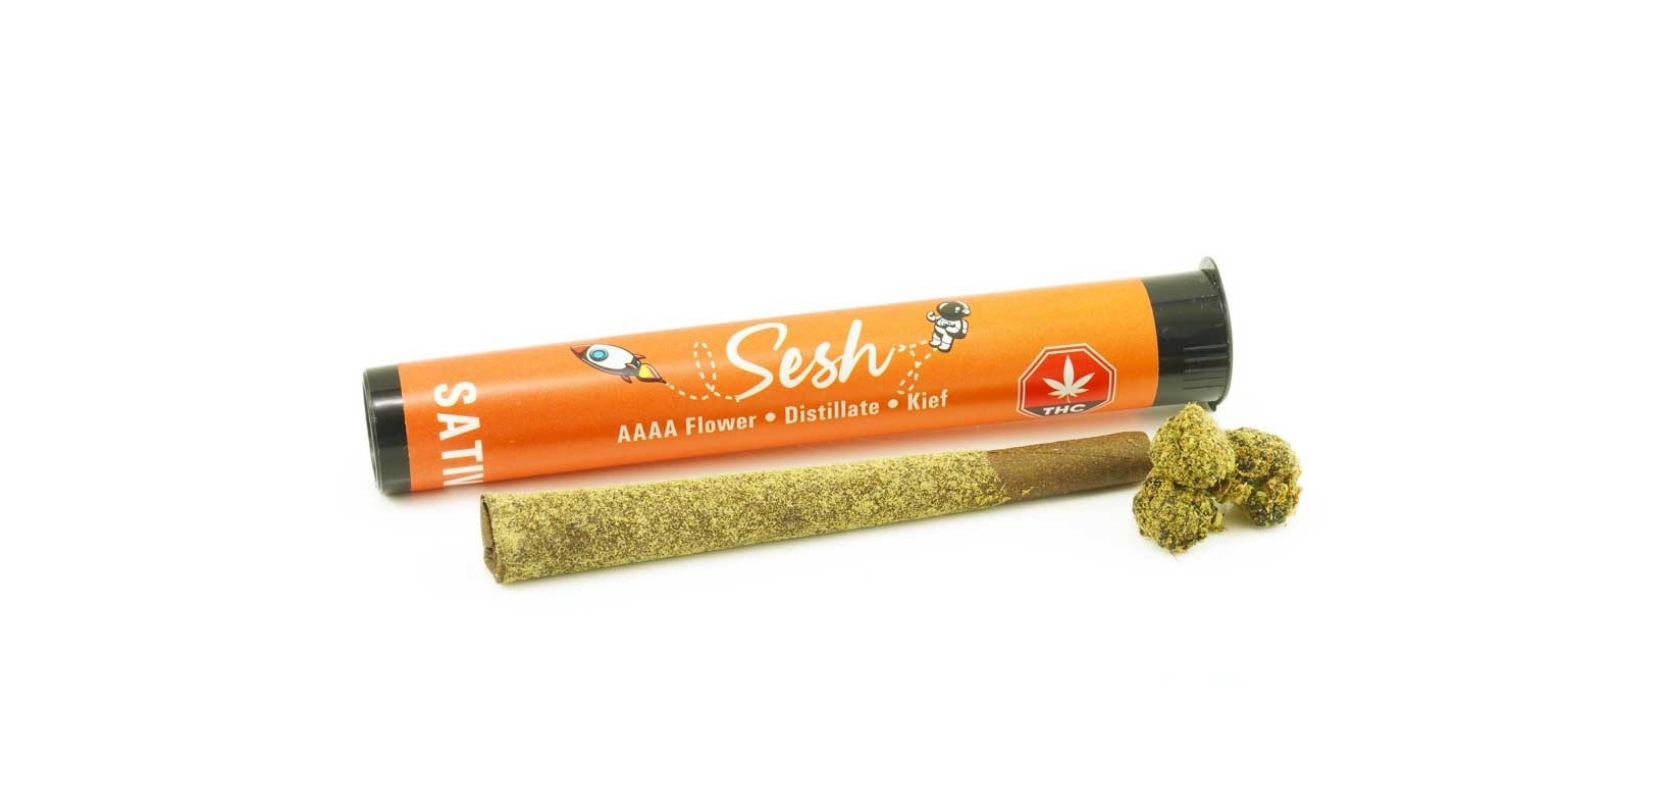 Sesh blunts are made with hemp wraps hand rolled with 1.5 grams of the finest AAAA flower, then dipped in premium distillate and rolled in kief. 